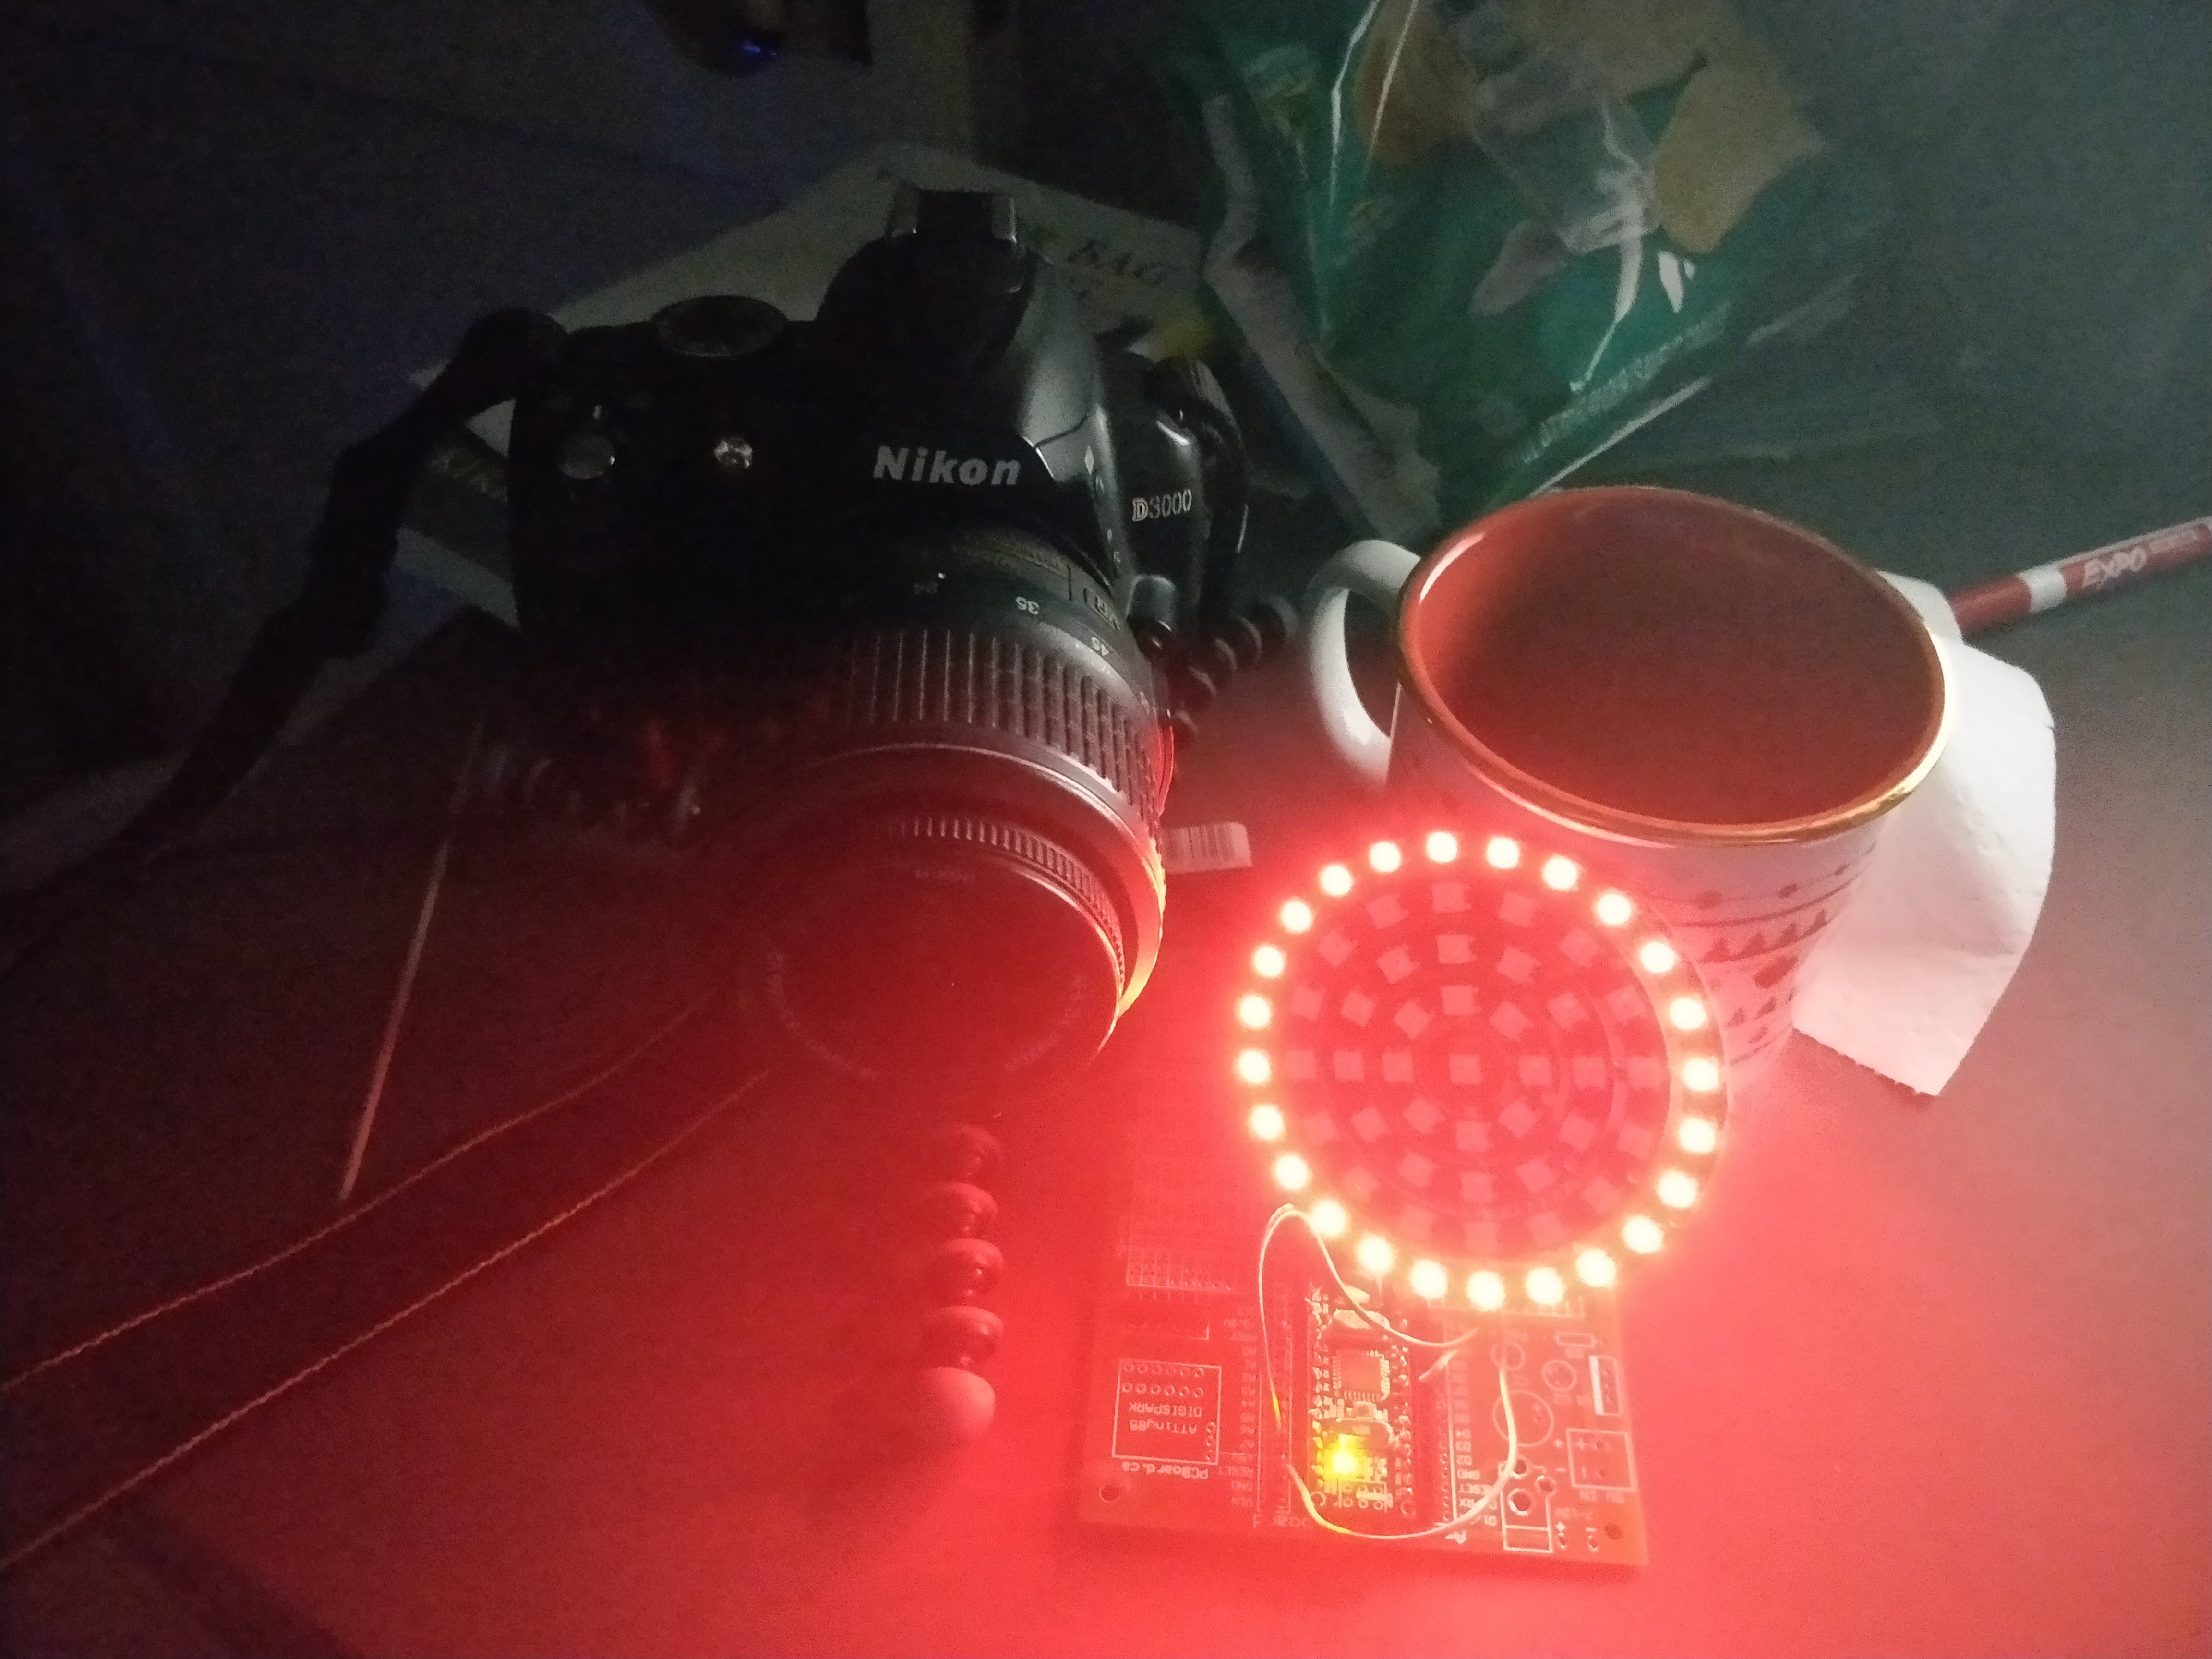 A picture of A Nikon SLR camera next a ring of LEDs. The ring is illuminated bright red.